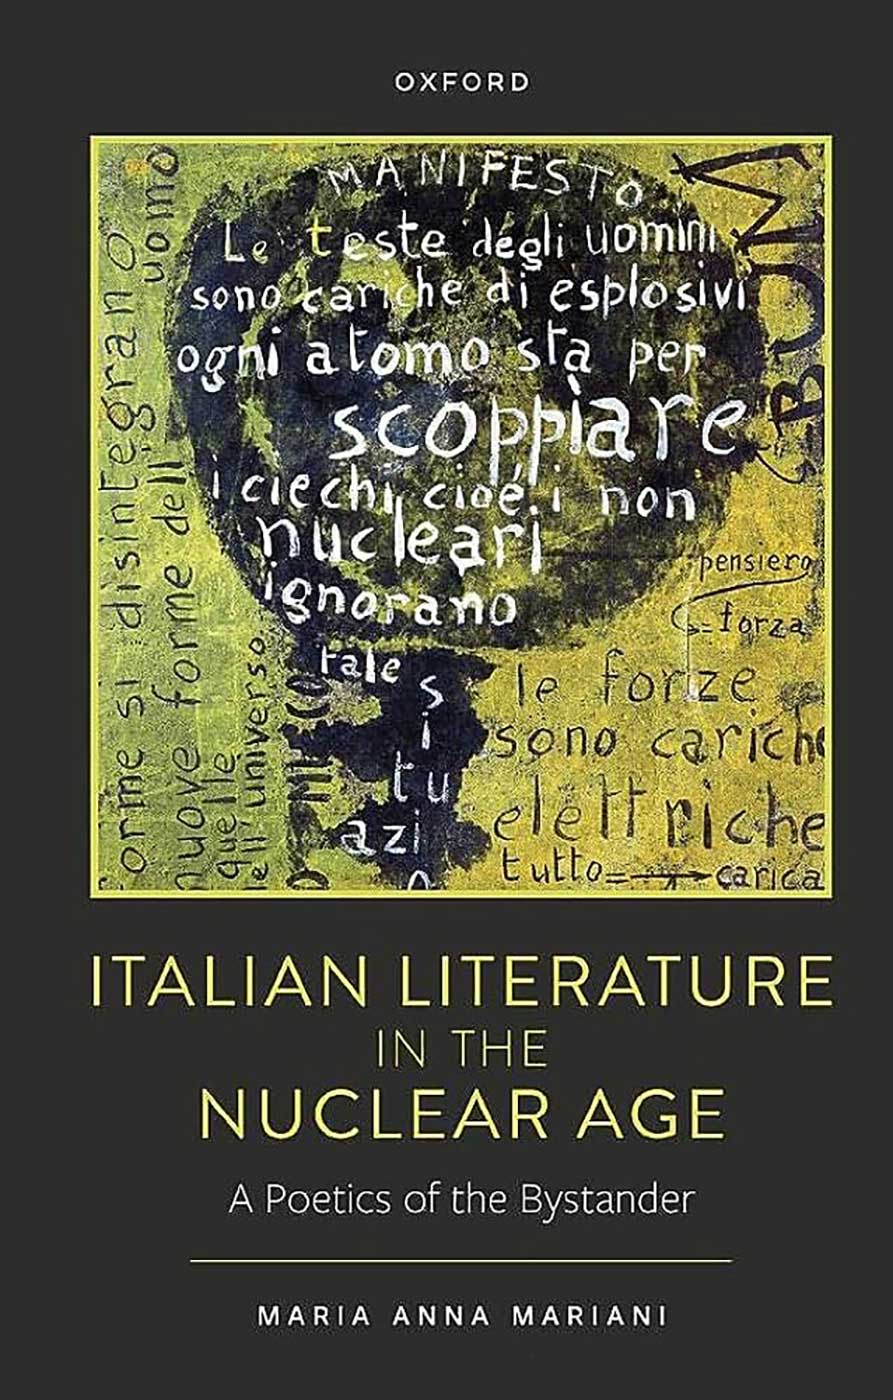 Book cover of Italian Literature in the Nuclear Age by Maria Anna Mariani